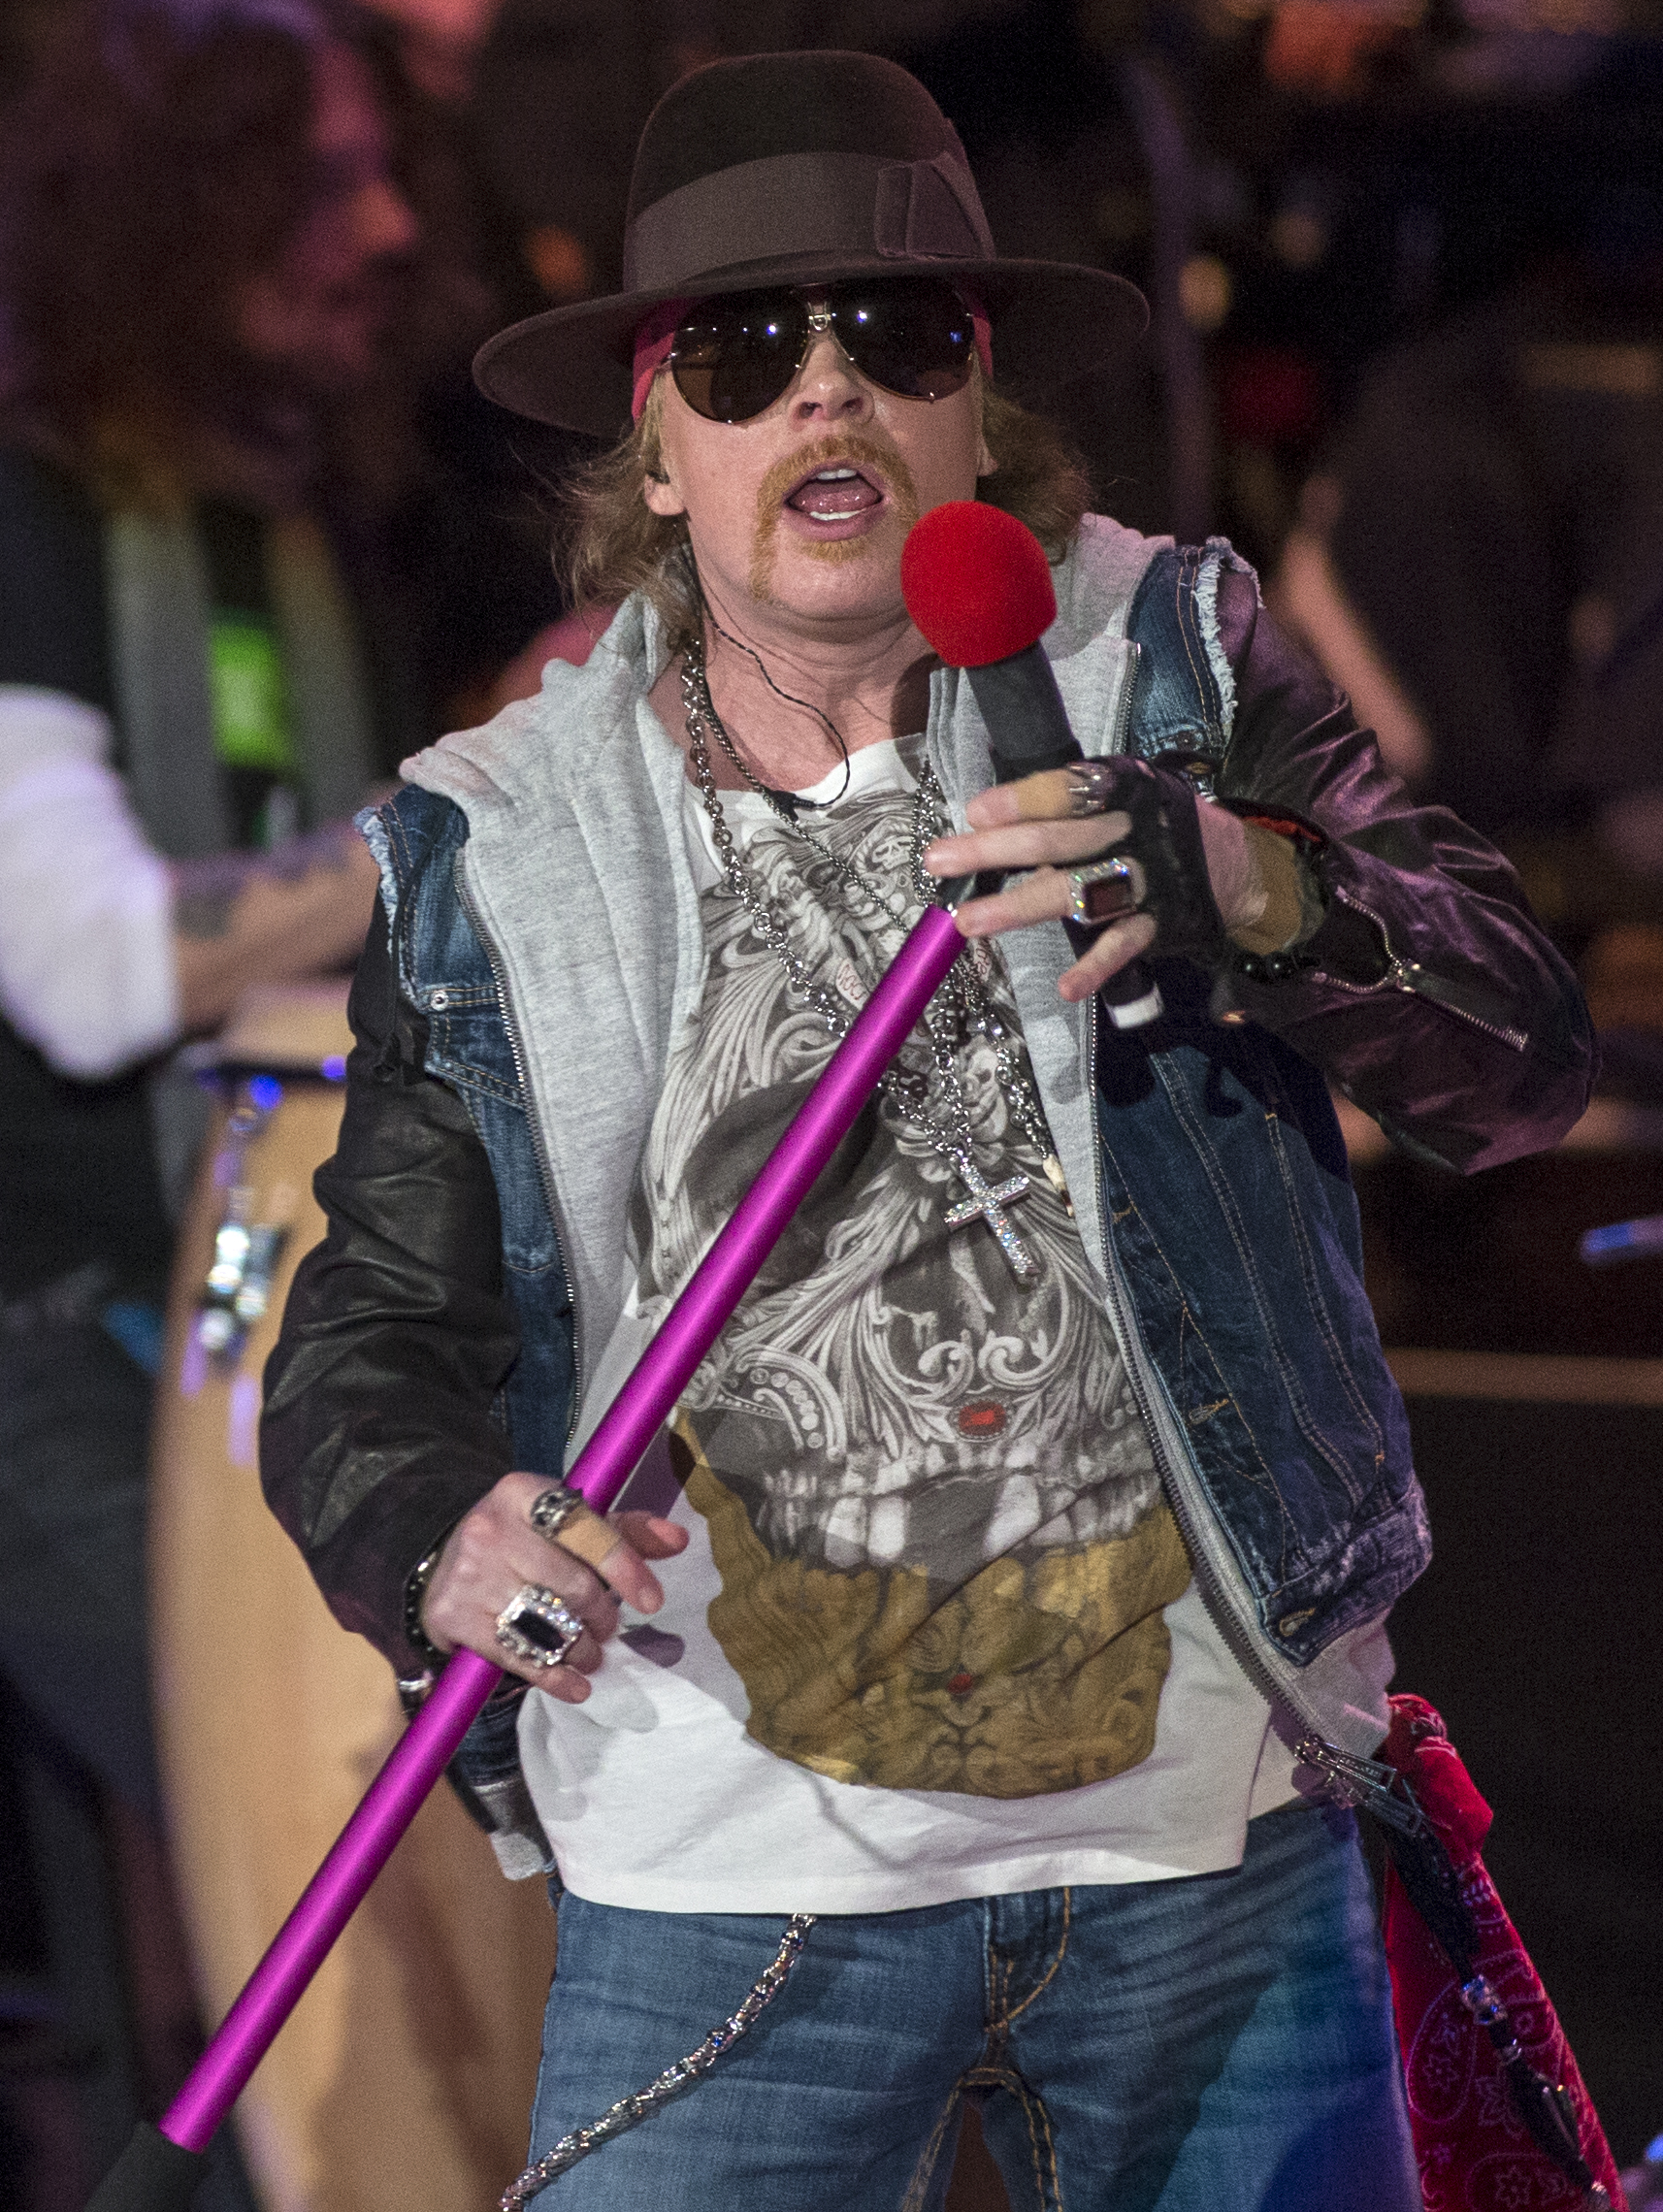 Guns N' Roses front man Axl Rose performs at the 26th annual Bridge School benefit concert at the Shoreline Amphitheatre in Mountain View, Calif., on Saturday, Oct. 21, 2012. (John Green/Staff)